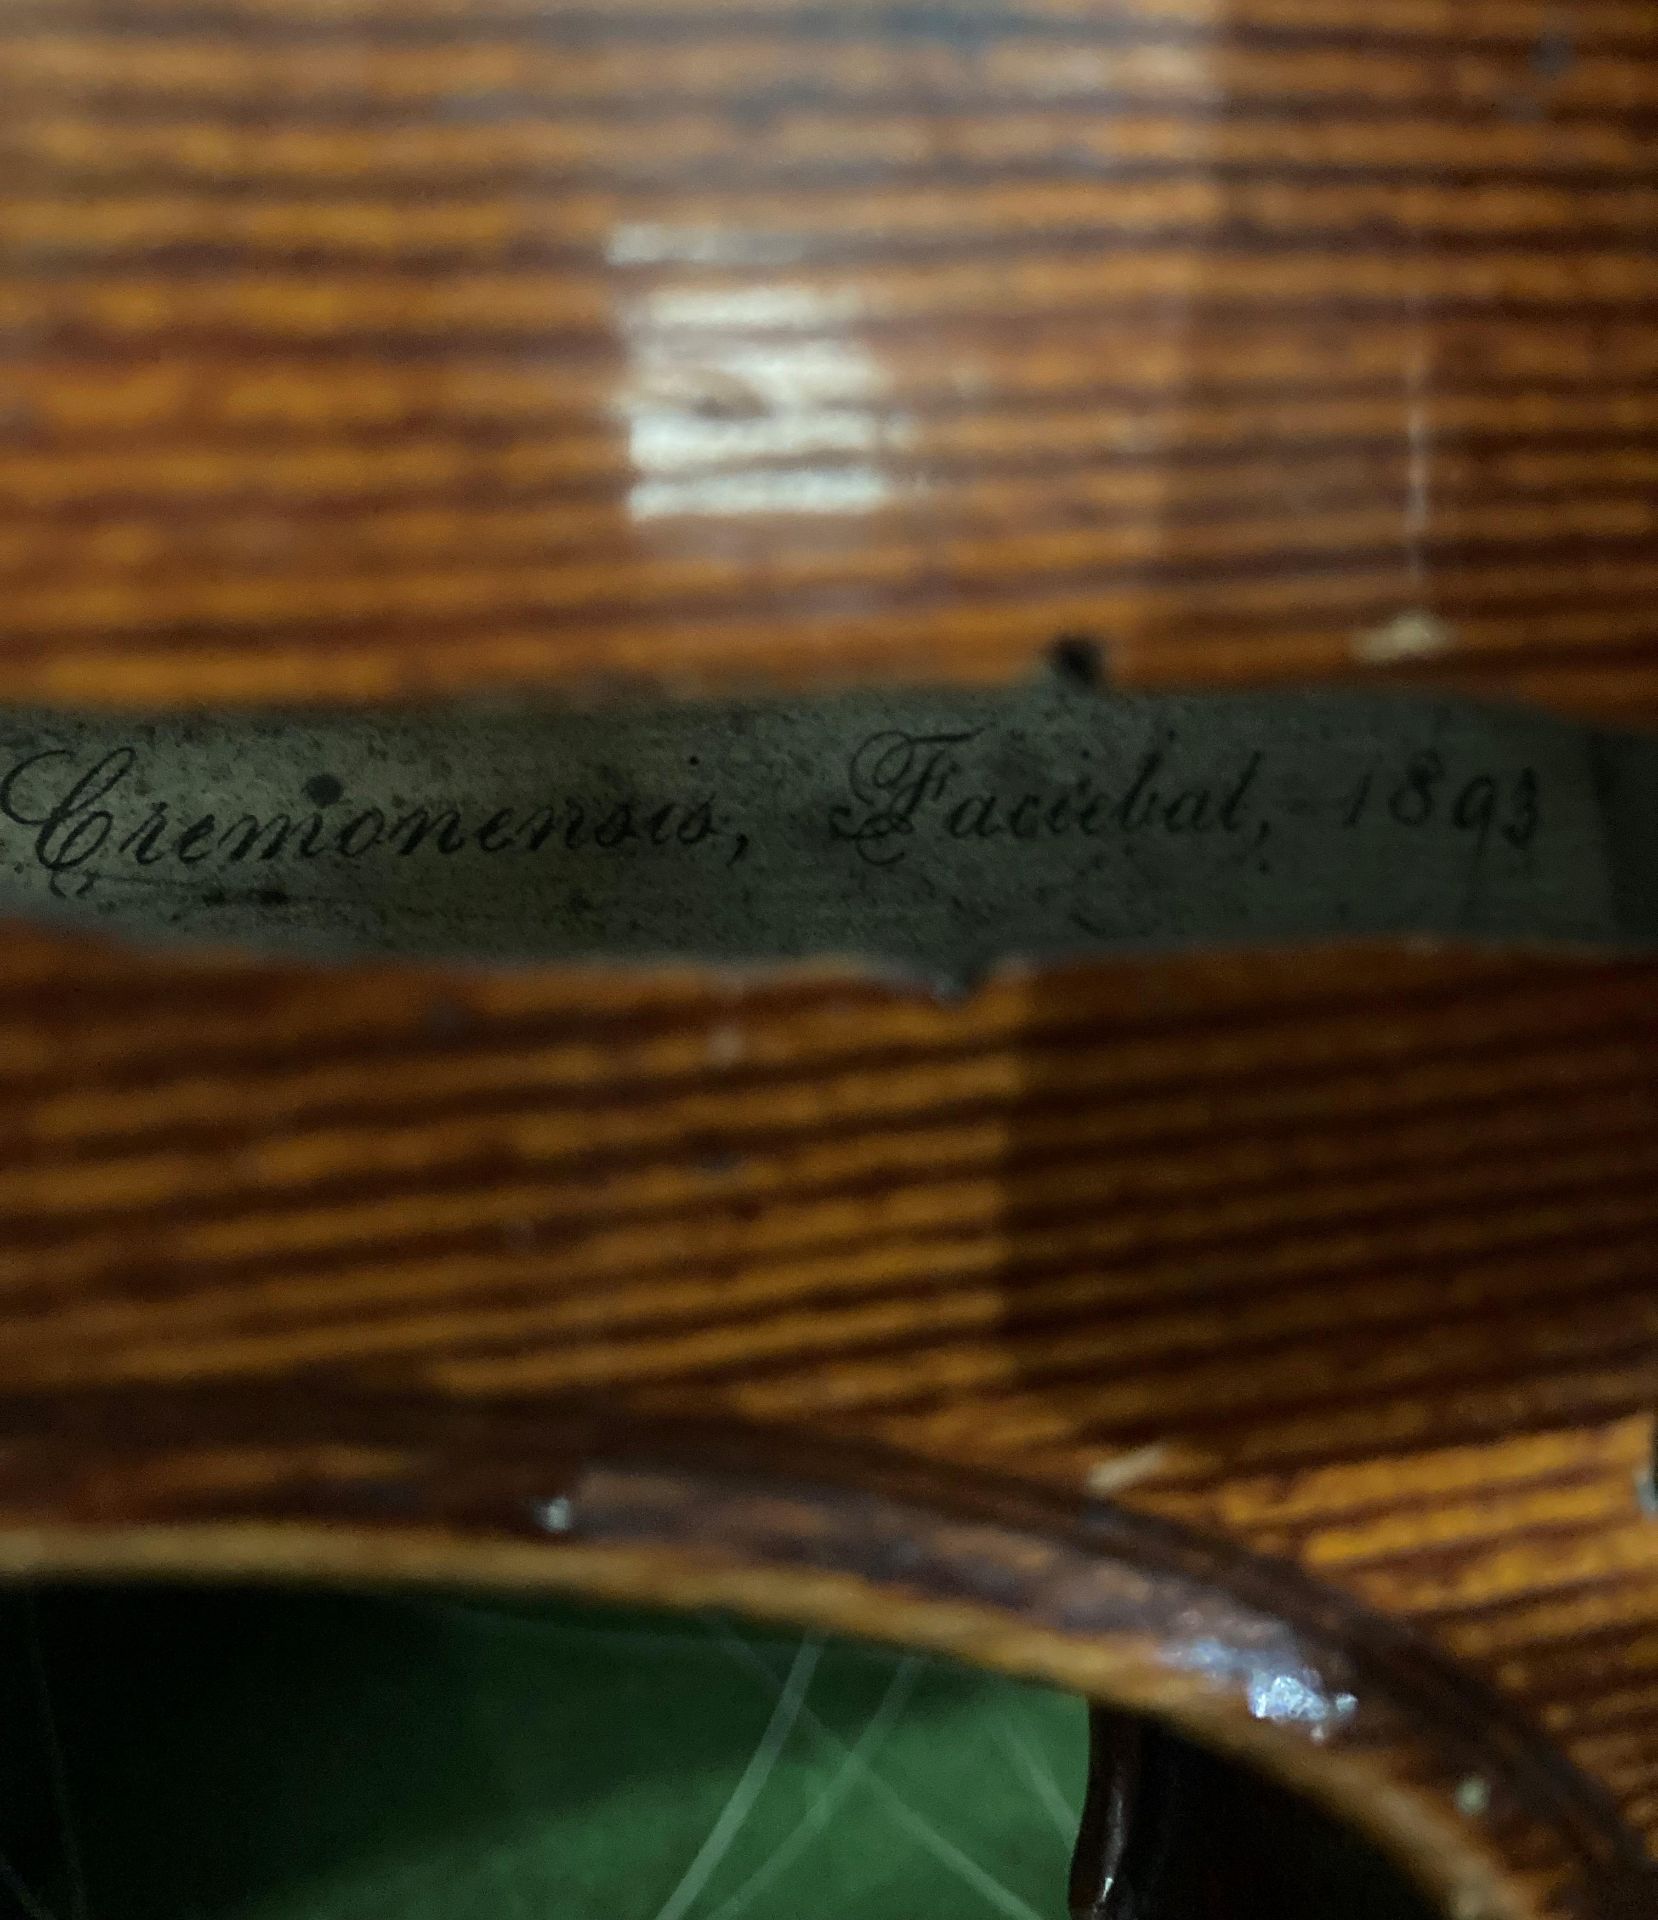 Carlo Storioni Cremonensis Faciebat 1893 violin with bow in a black case lined with green fabric - Image 3 of 14